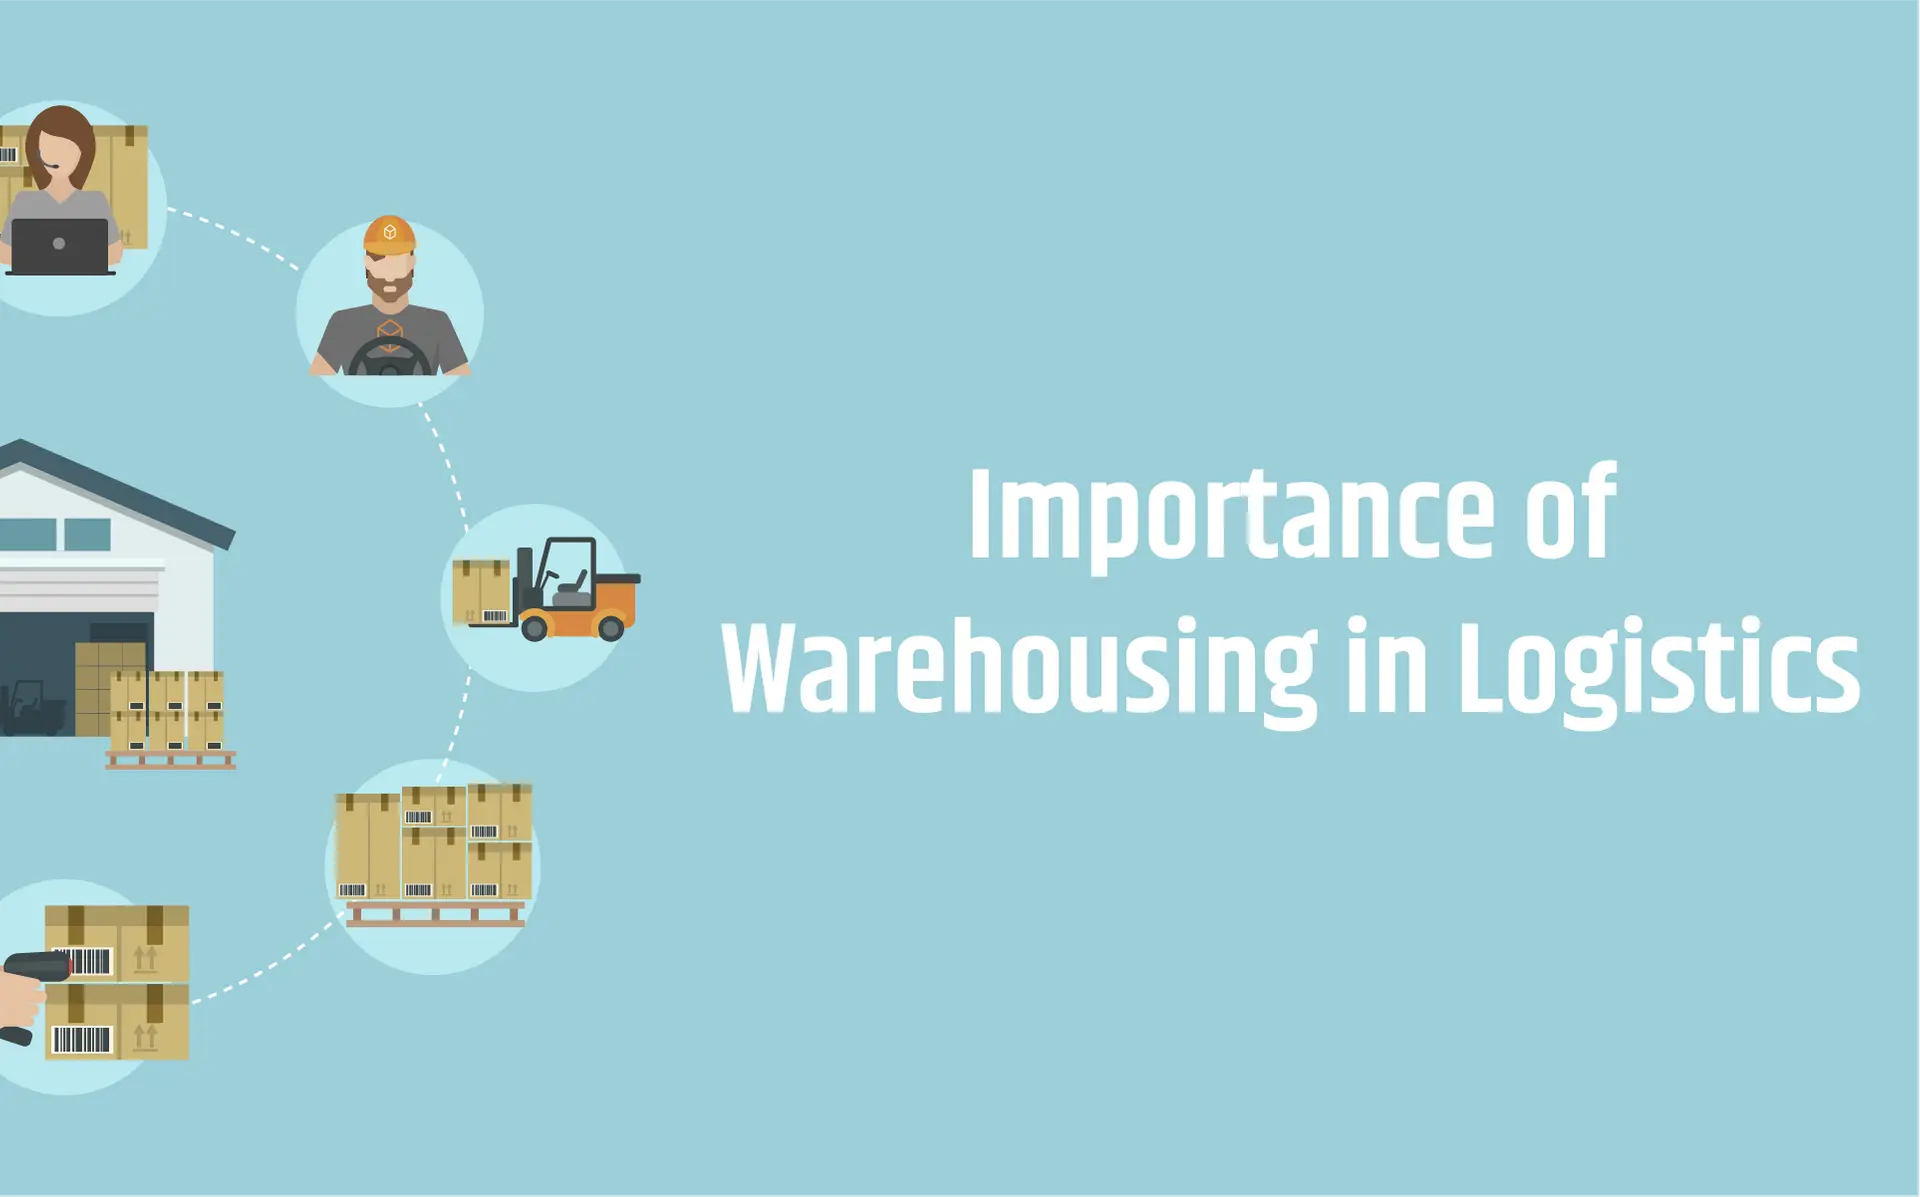 Warehousing Services And Inventory Management In Logistics